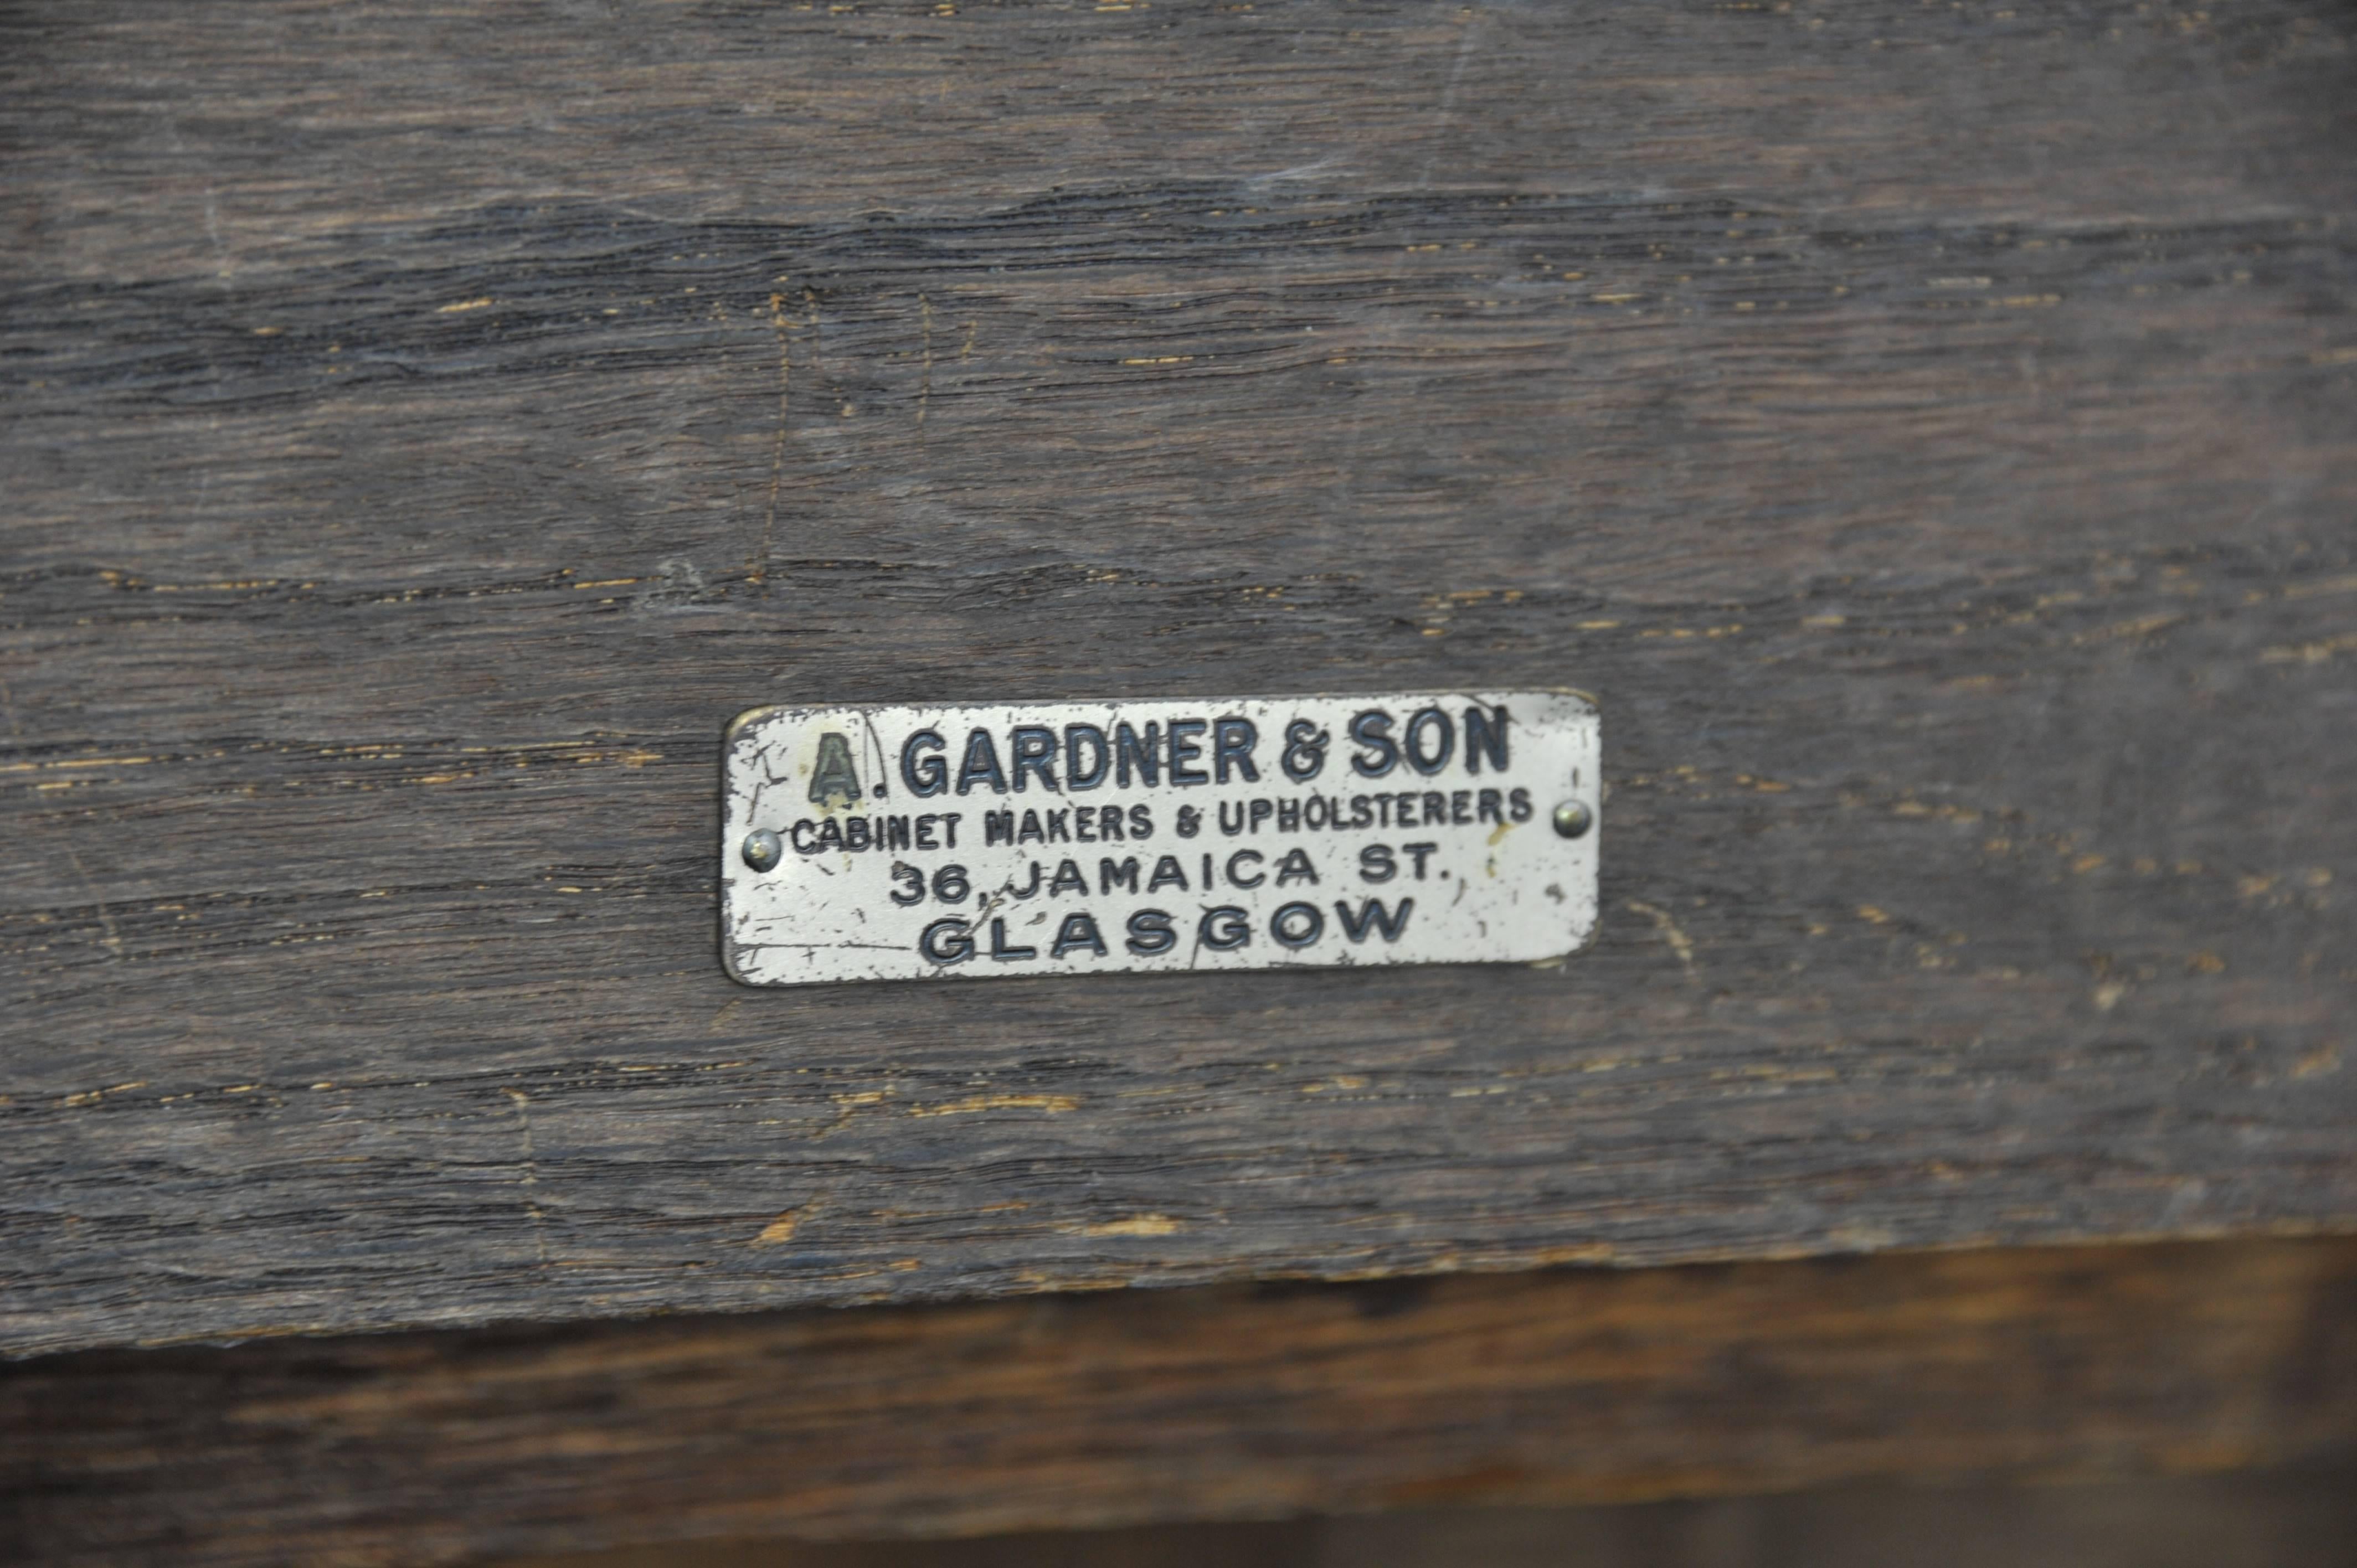 Late 19th Century Antique Hall Bench, Carved Oak Settle, Lift Up Seat, a Gardner of Glasgow